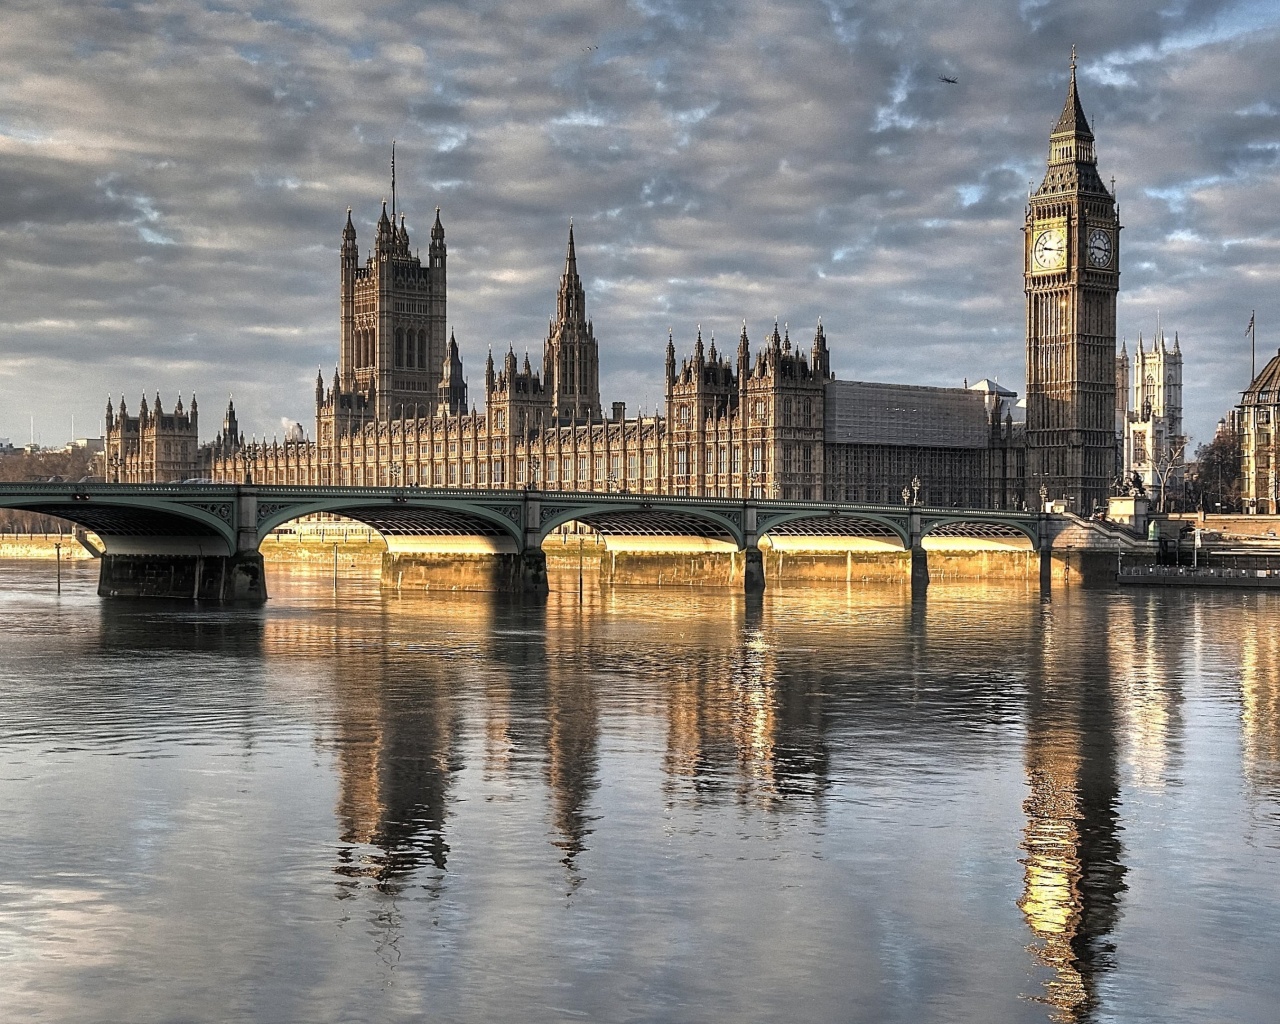 Palace of Westminster in London screenshot #1 1280x1024